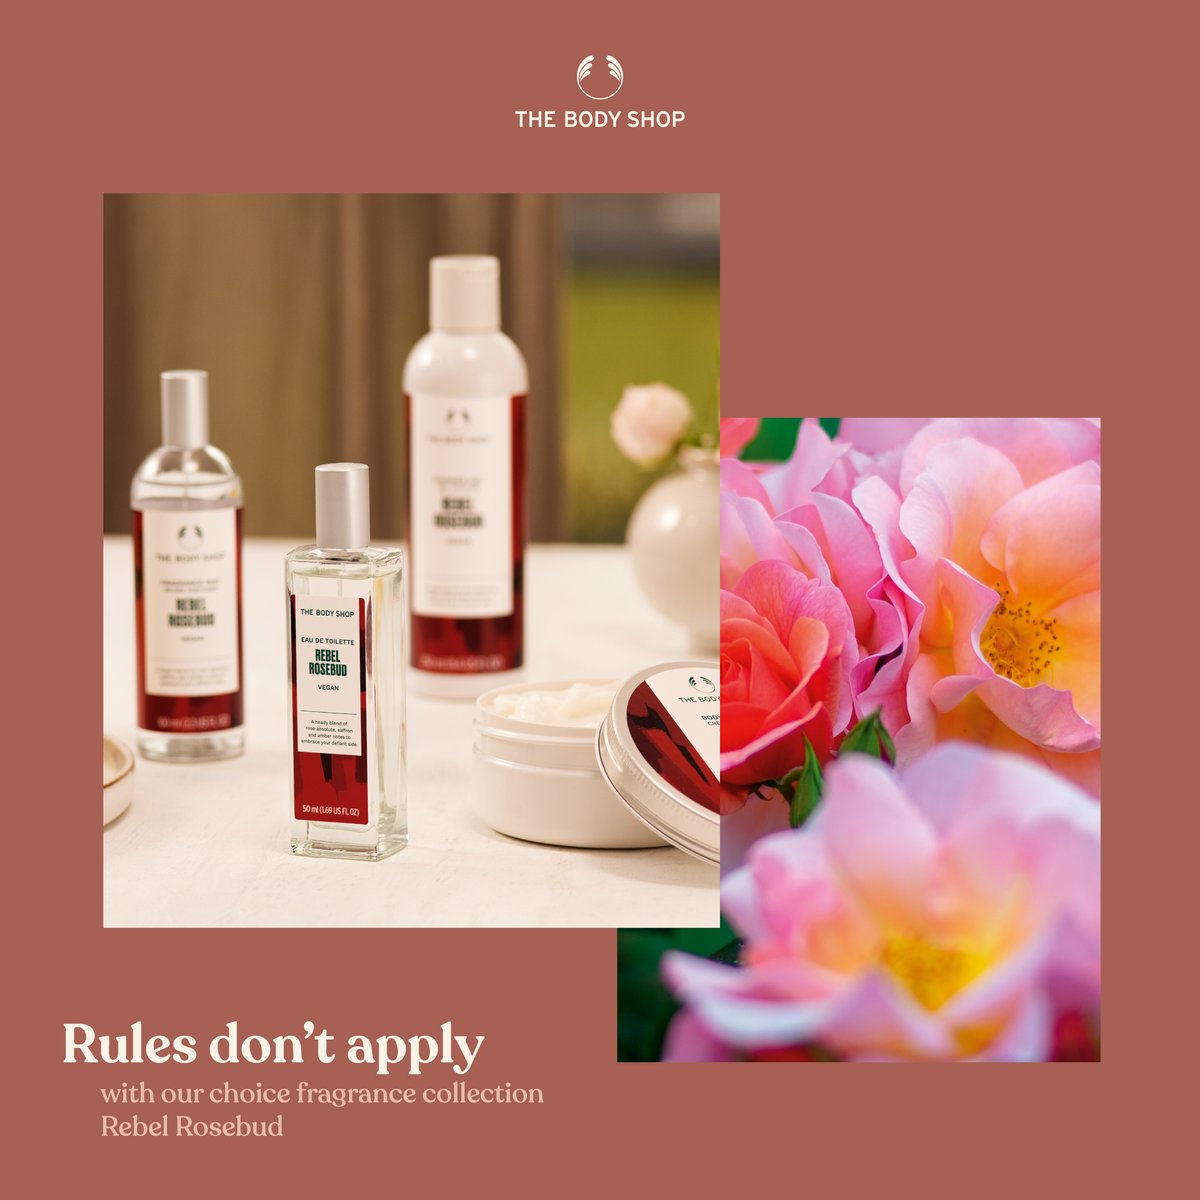 Fancy trying something new? View my site to find your new fave scent! 🛒
consultant.thebodyshop.com/en-gb/myshop/M…

#Fragrance #RebelRosebud #Vegan #TBSAH #TheBodyShop